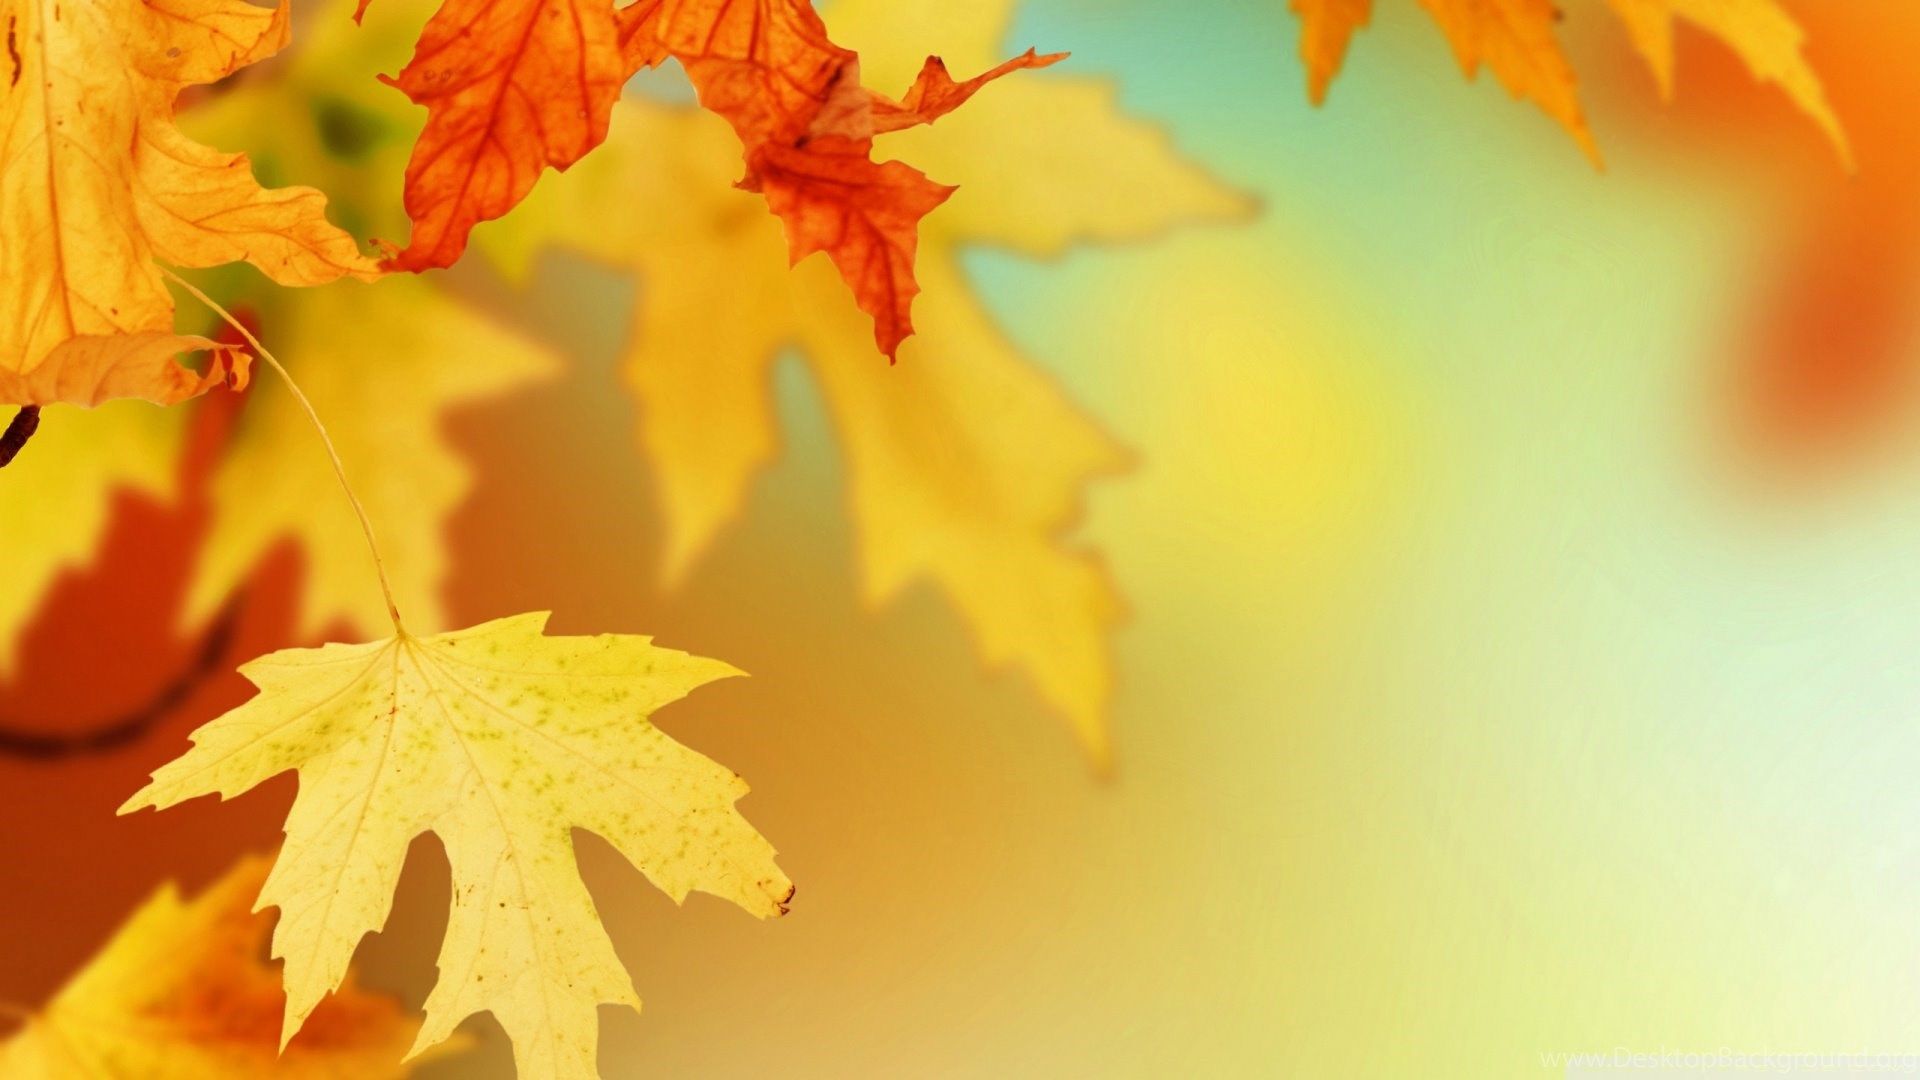 Dry Leaves Autumn Wallpaper HD Wallpaper Background Of Your. Desktop Background